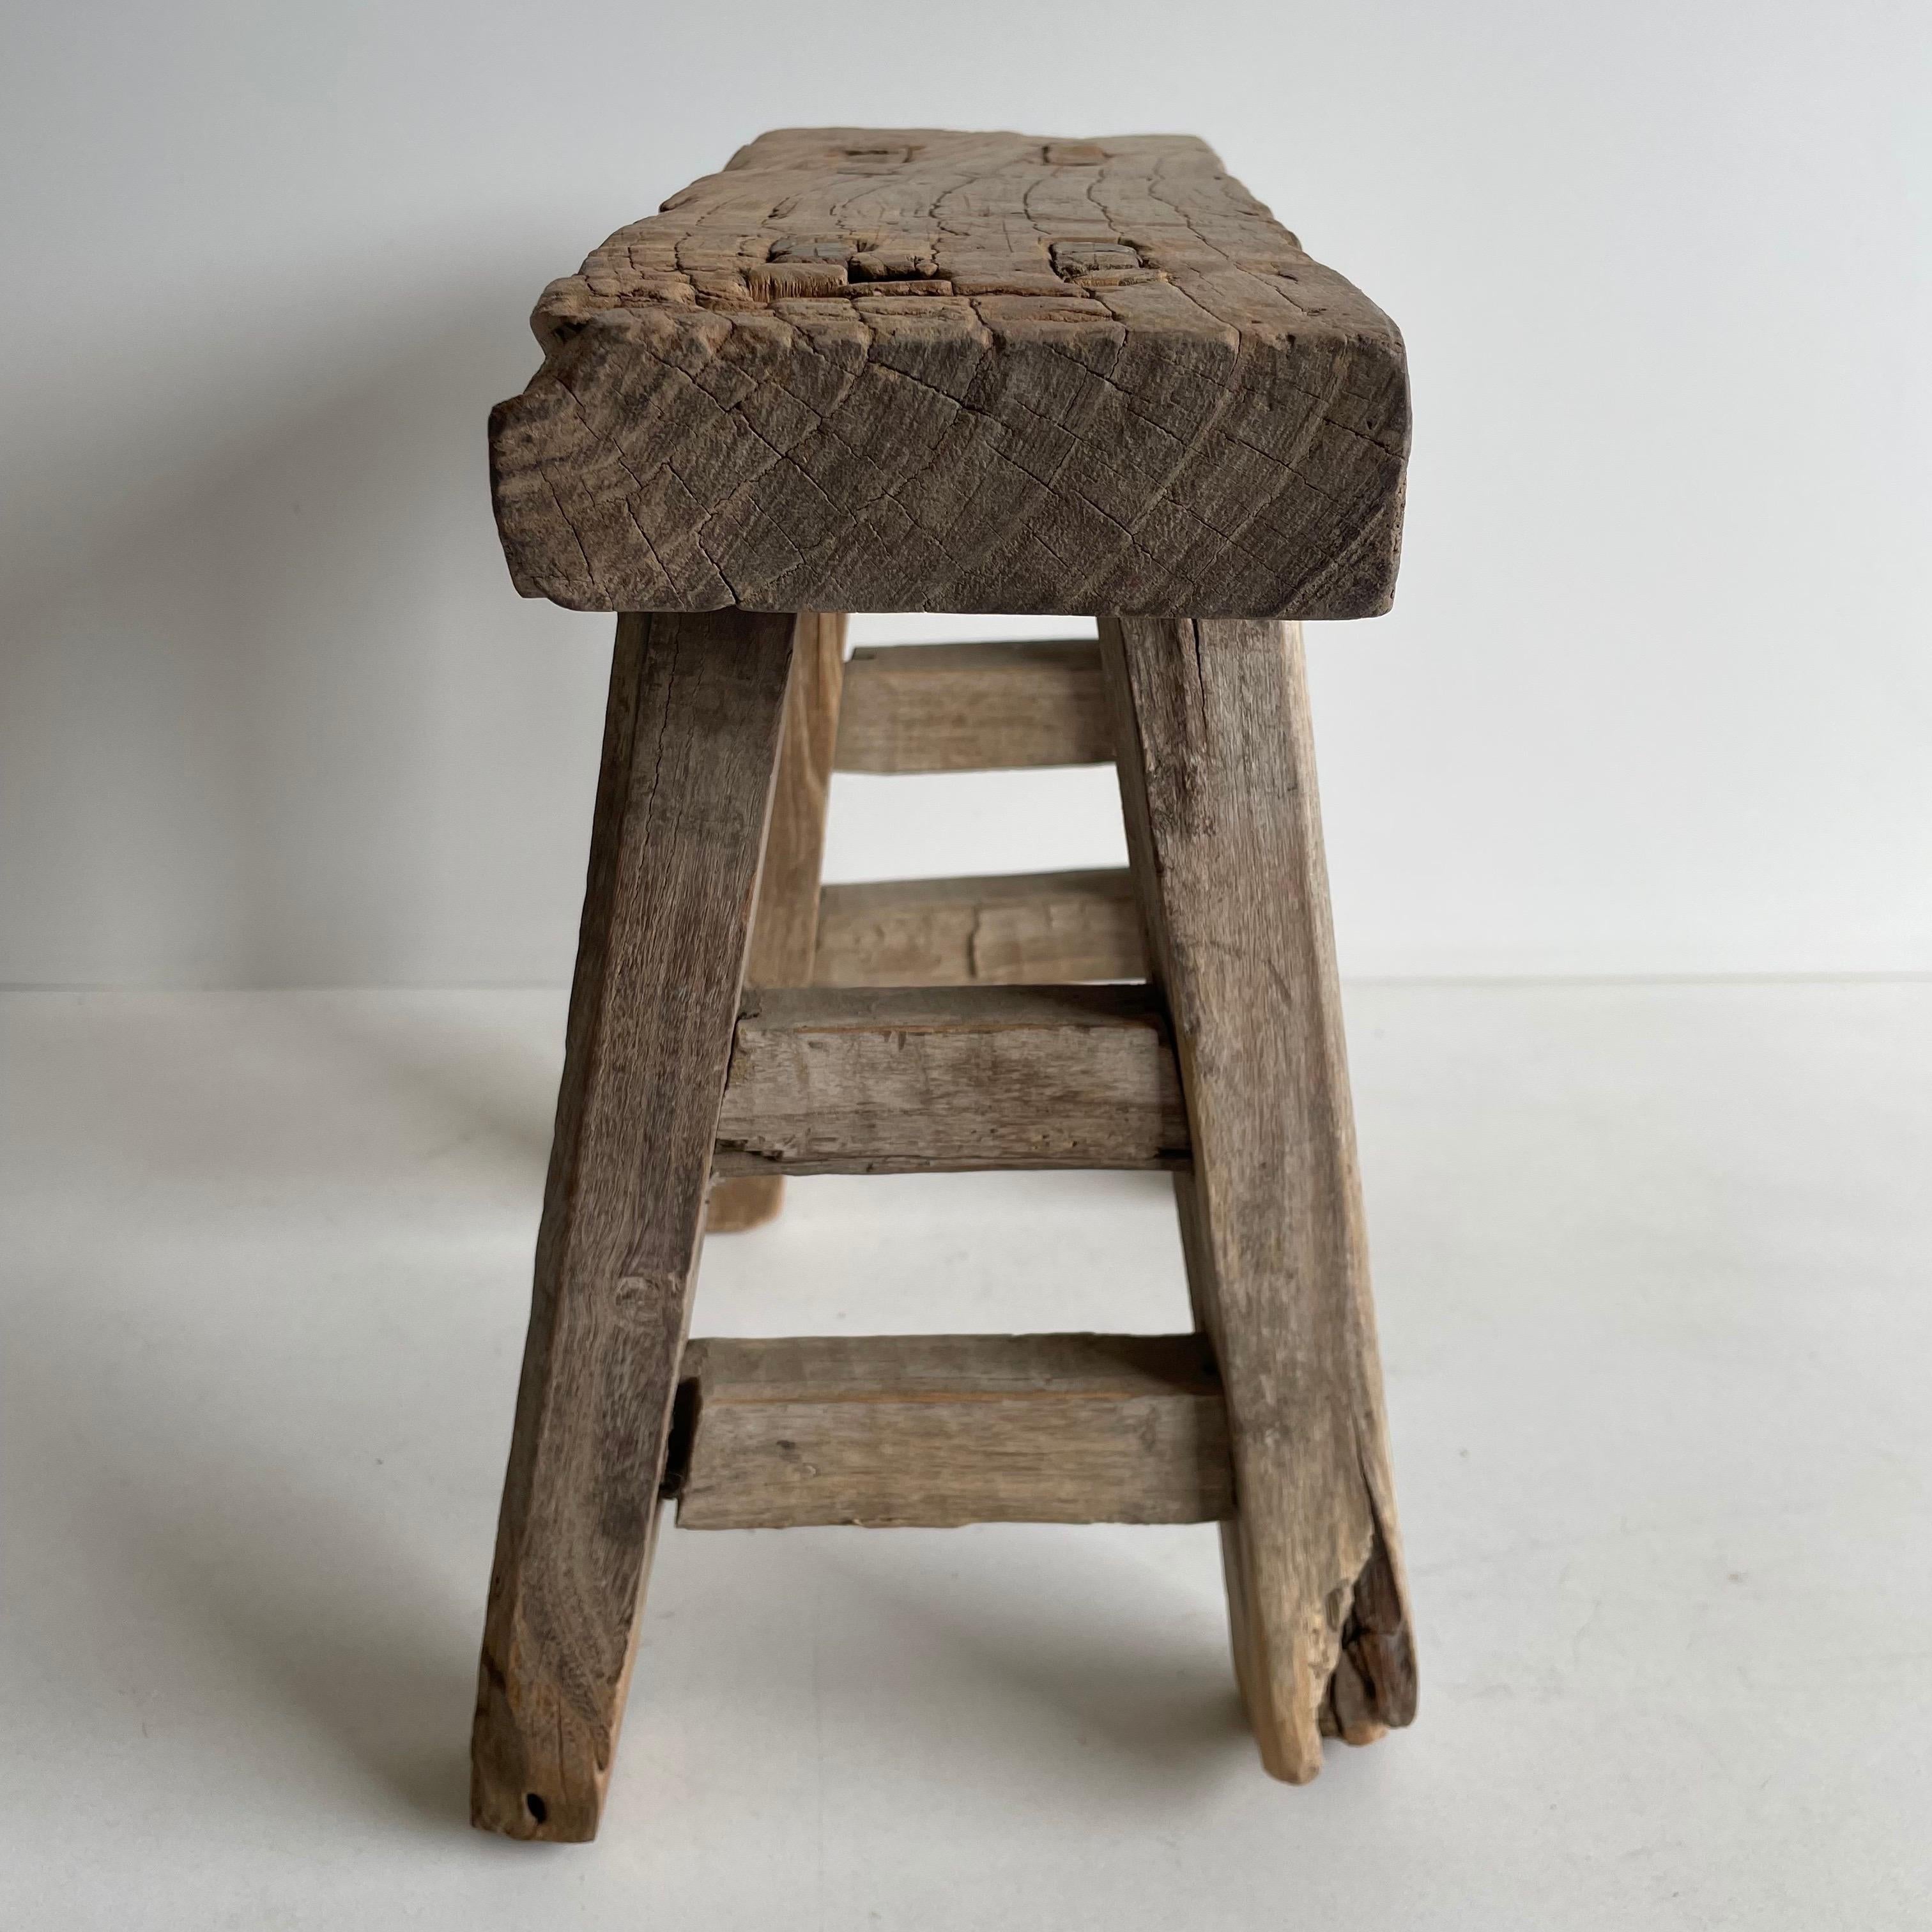 Vintage antique elm wood mini stool. These are the real vintage antique elm wood mini stools! Beautiful antique patina, with weathering and age, these are solid and sturdy ready for daily use, use as a table, stool, drink table, they are great for